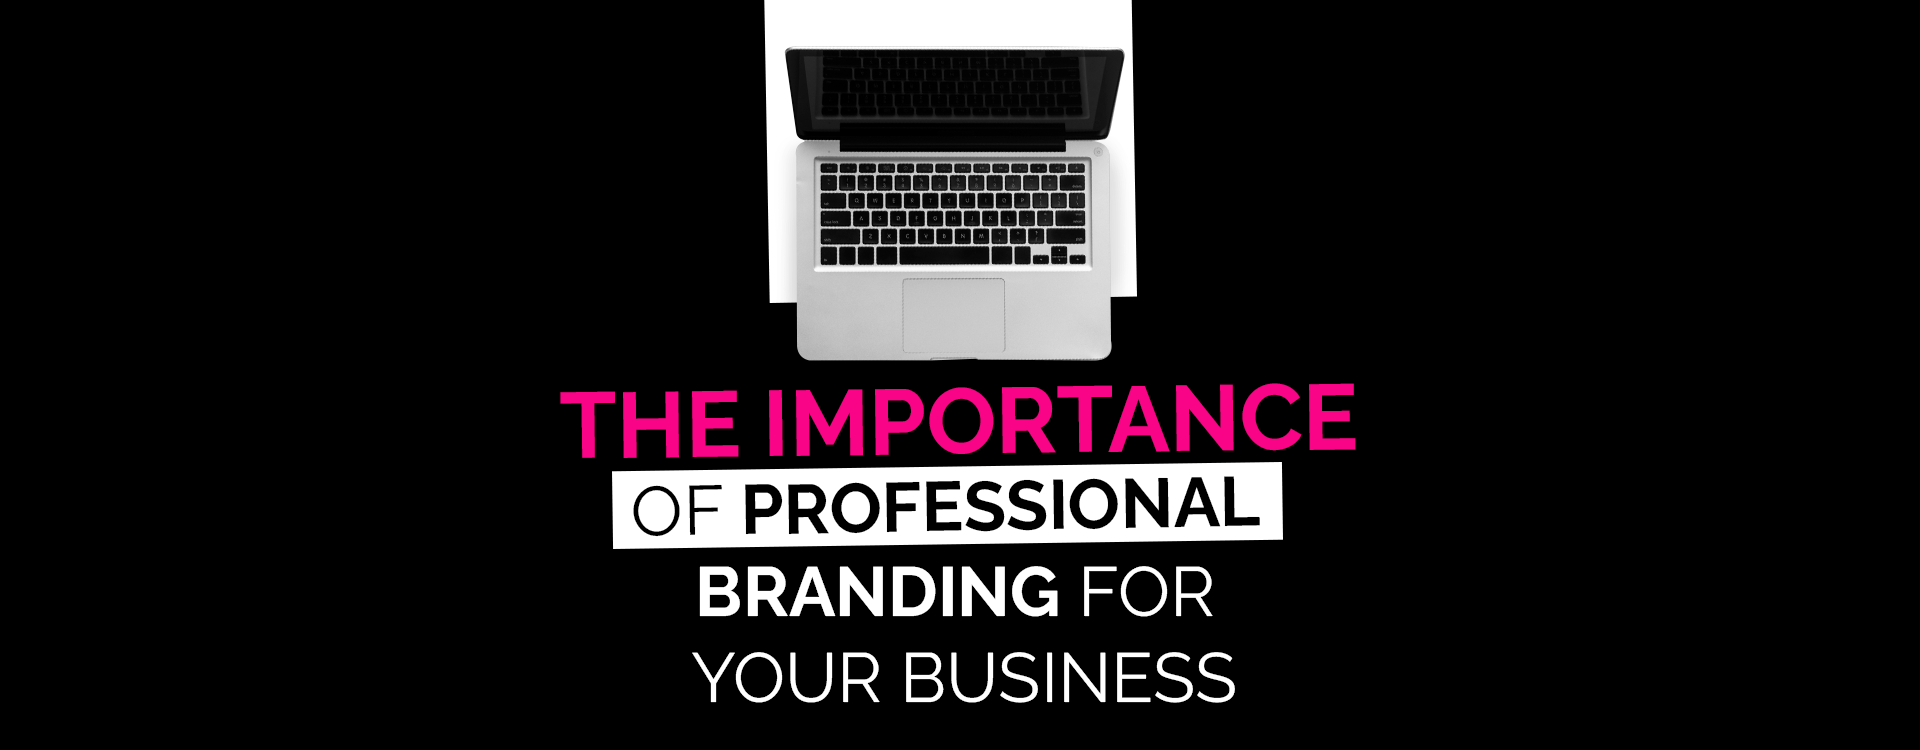 Stand Out In The UAE Marketplace: The Importance of Professional Branding For Your Business